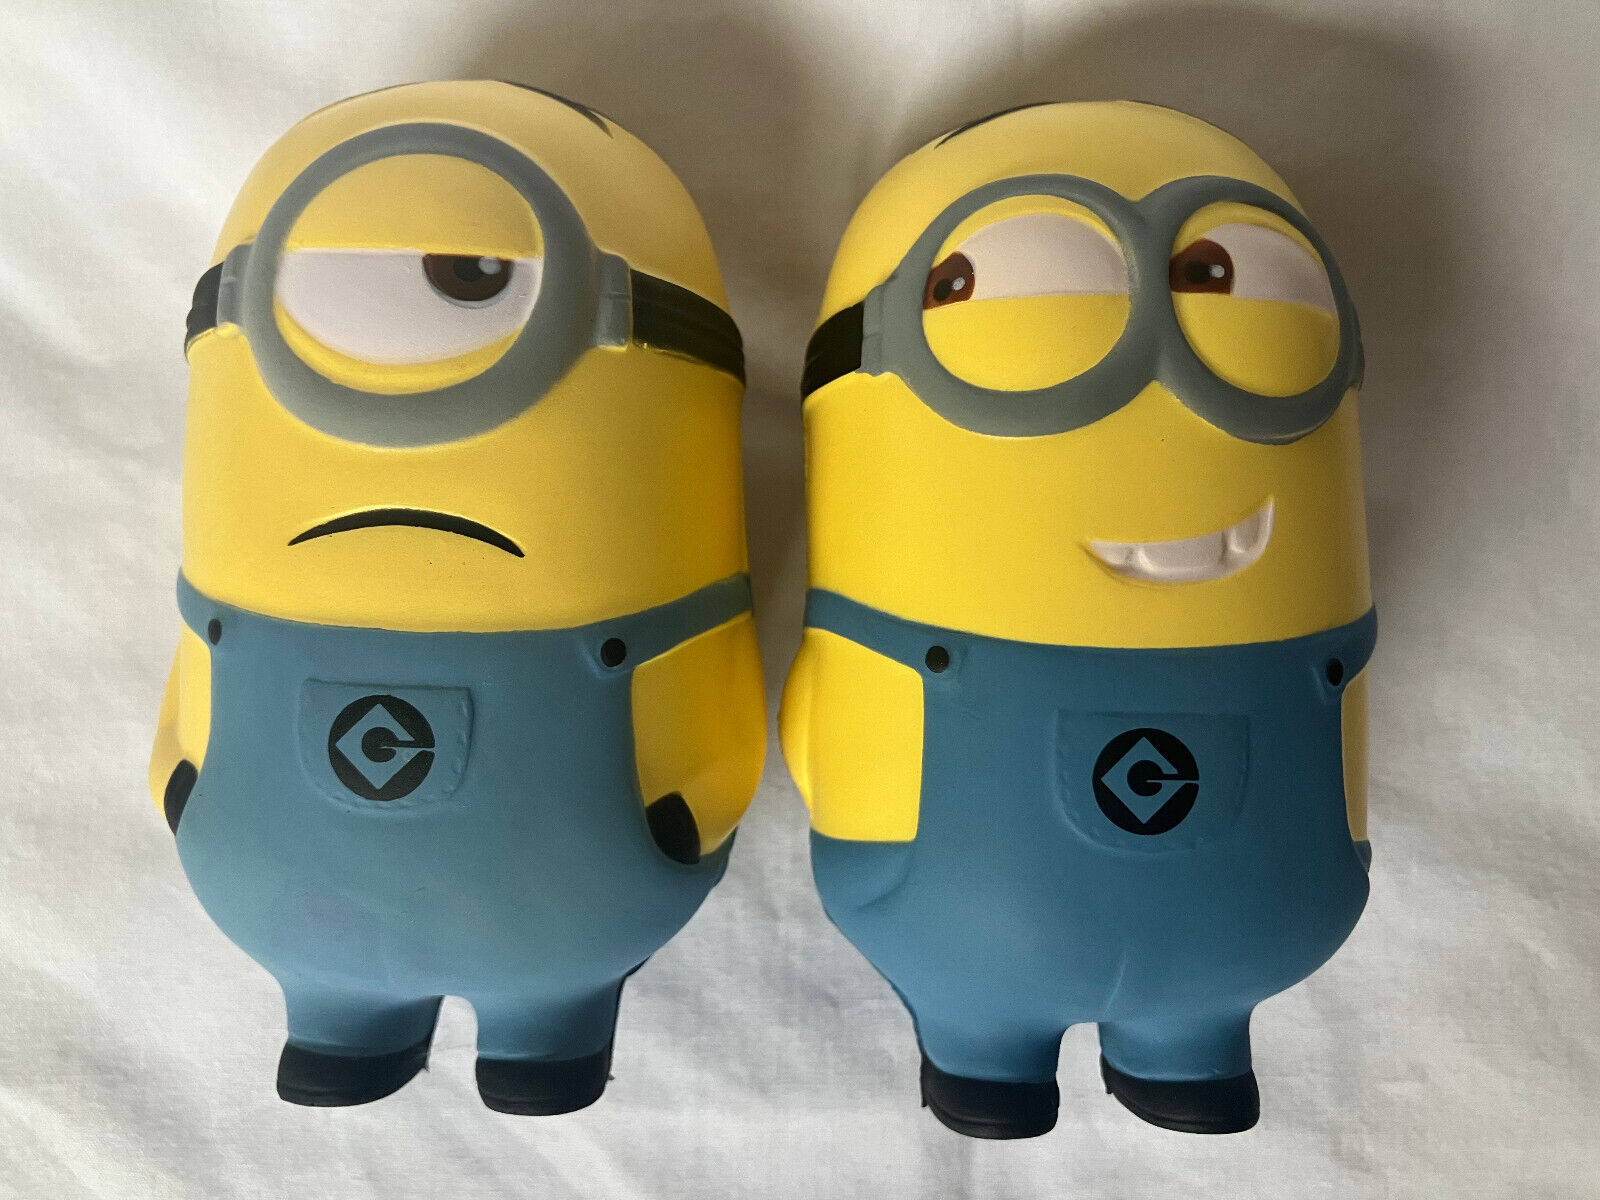 2 Minions Stress Toys approx 4 Inches Tall Bob and Stuart Despicable Me 2